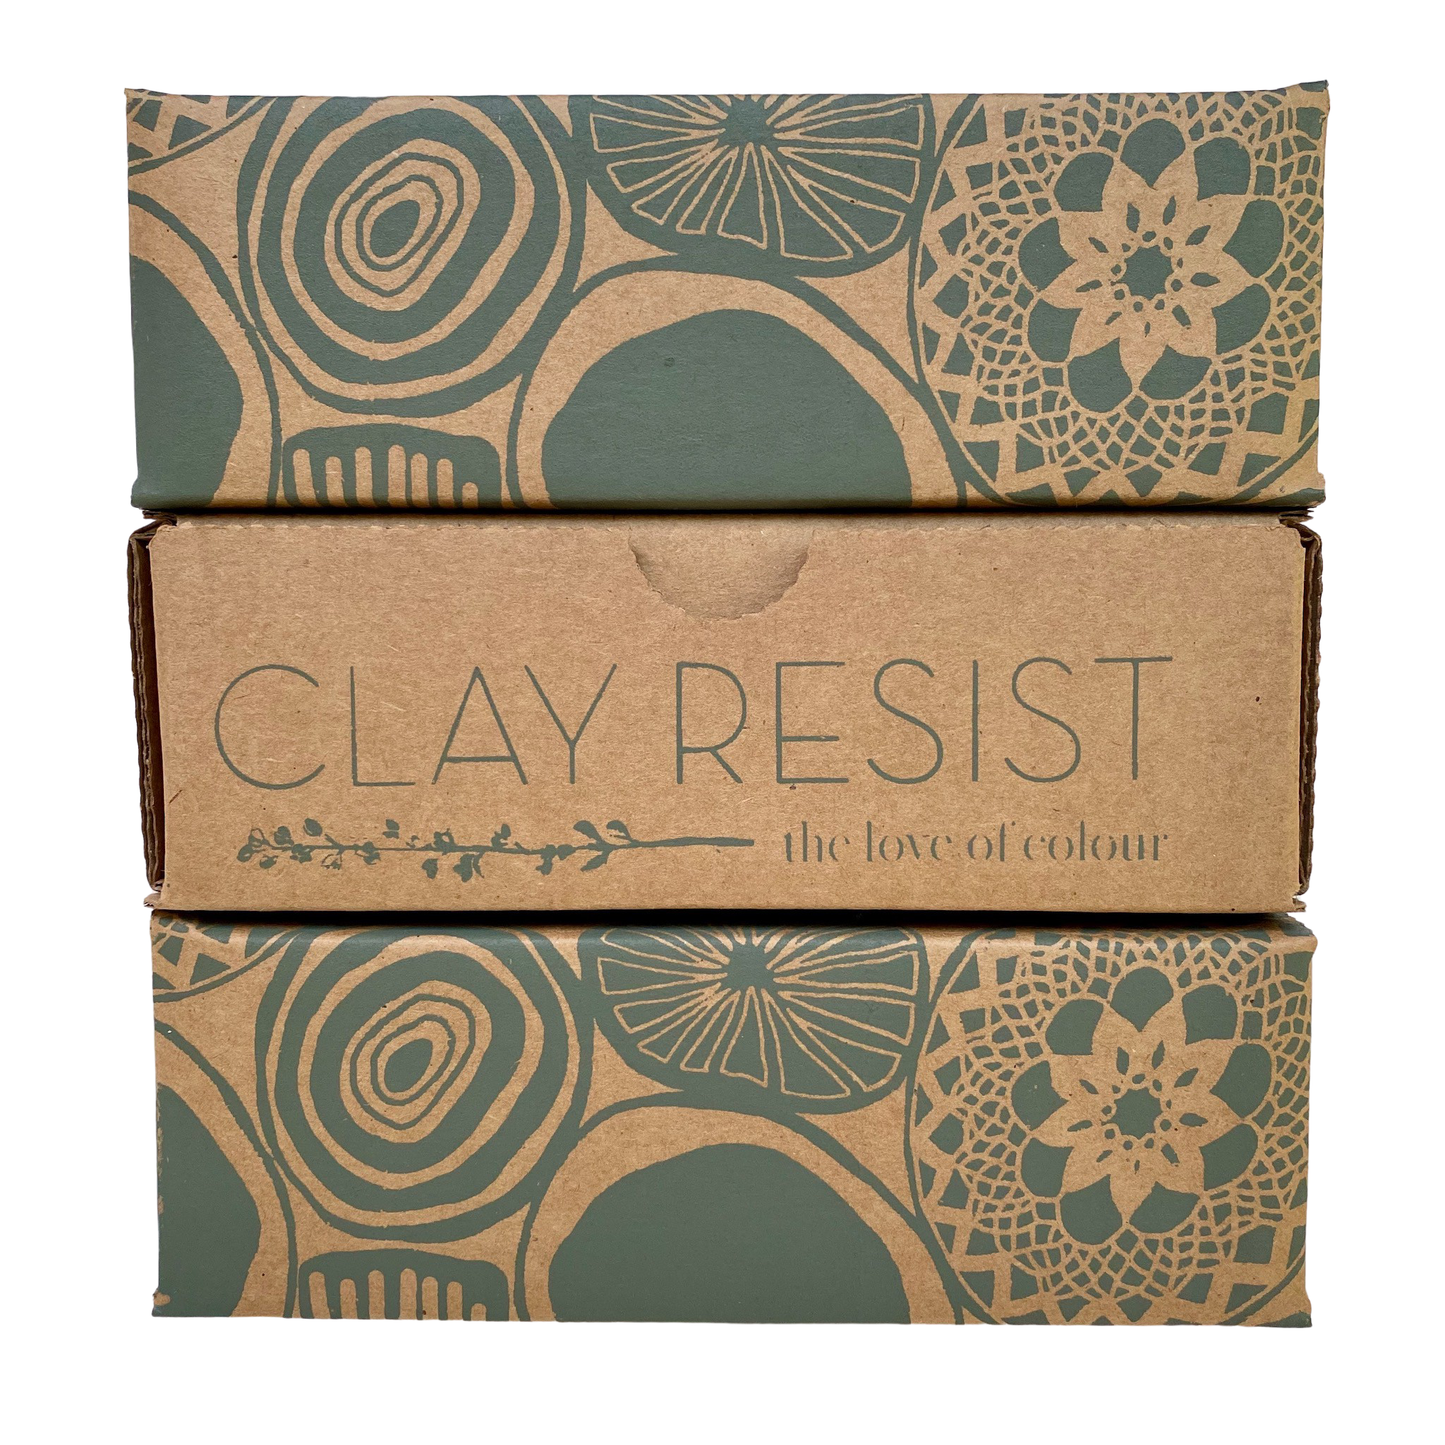 The Love of Colour - Clay Resist Kit